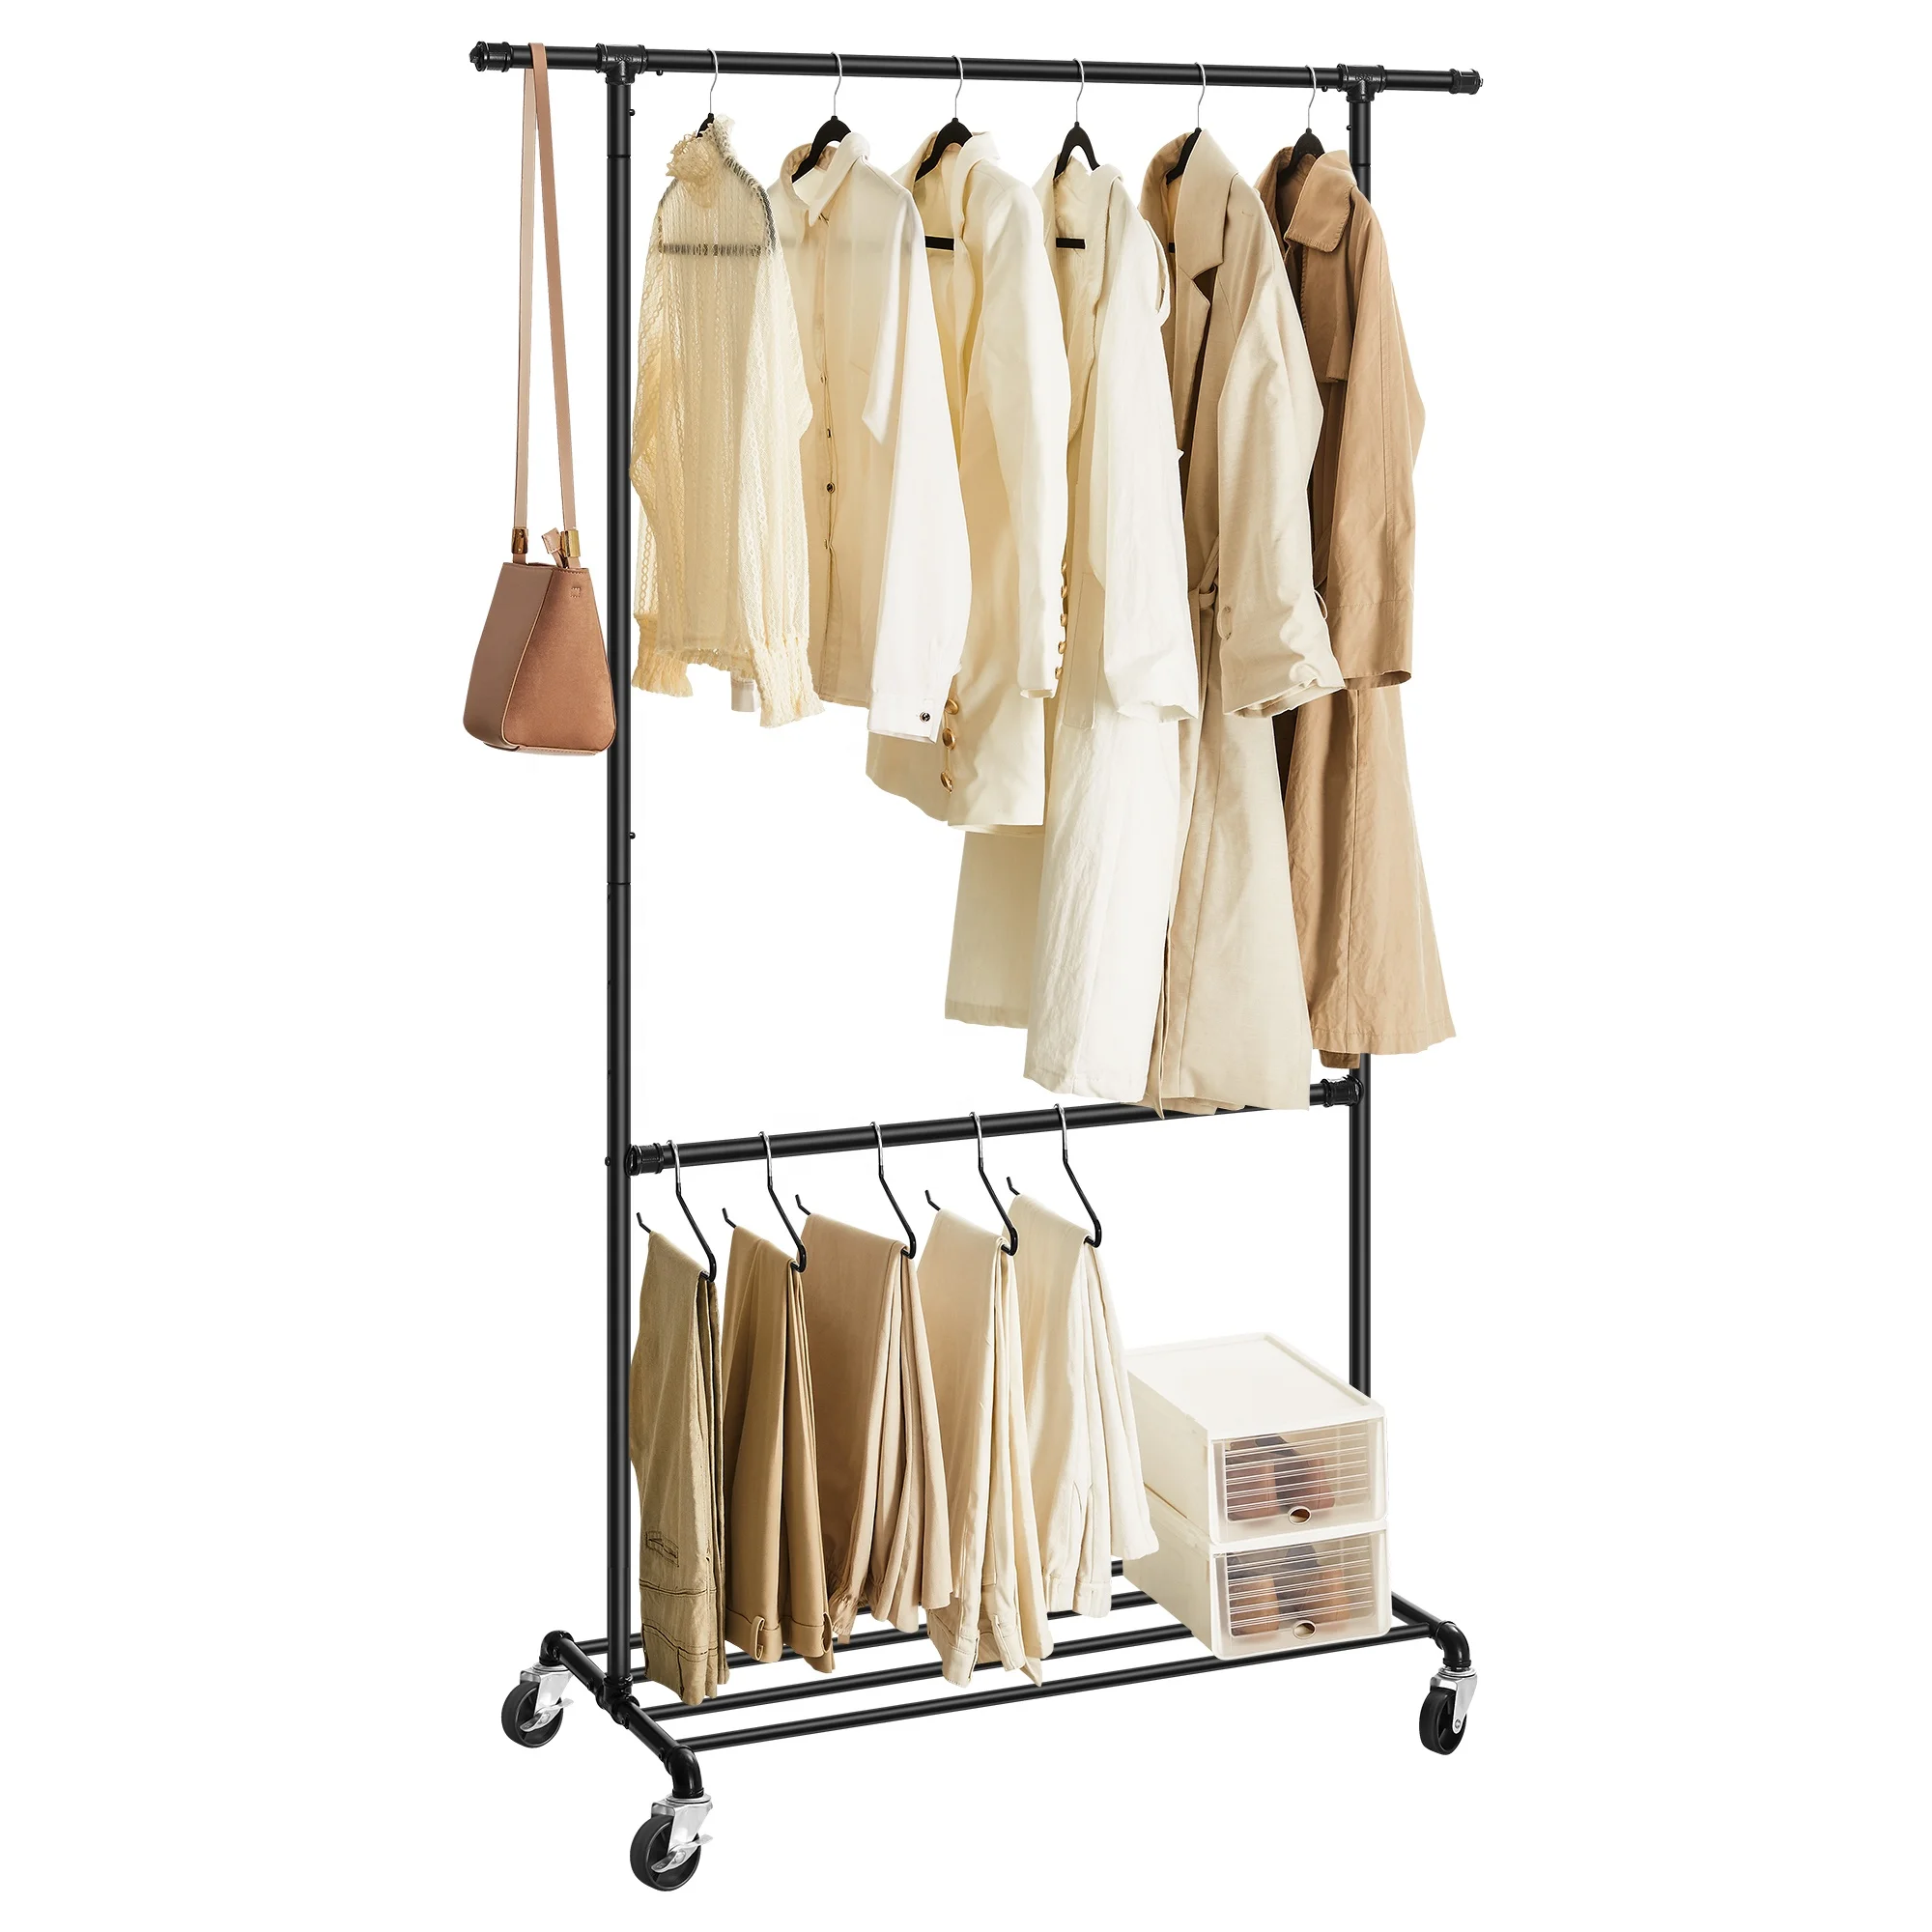 SONGMICS Double Hanging Rod Adjustable Metal Clothes Hanger Stand Industrial Style Clothes Garment Rack on Wheels